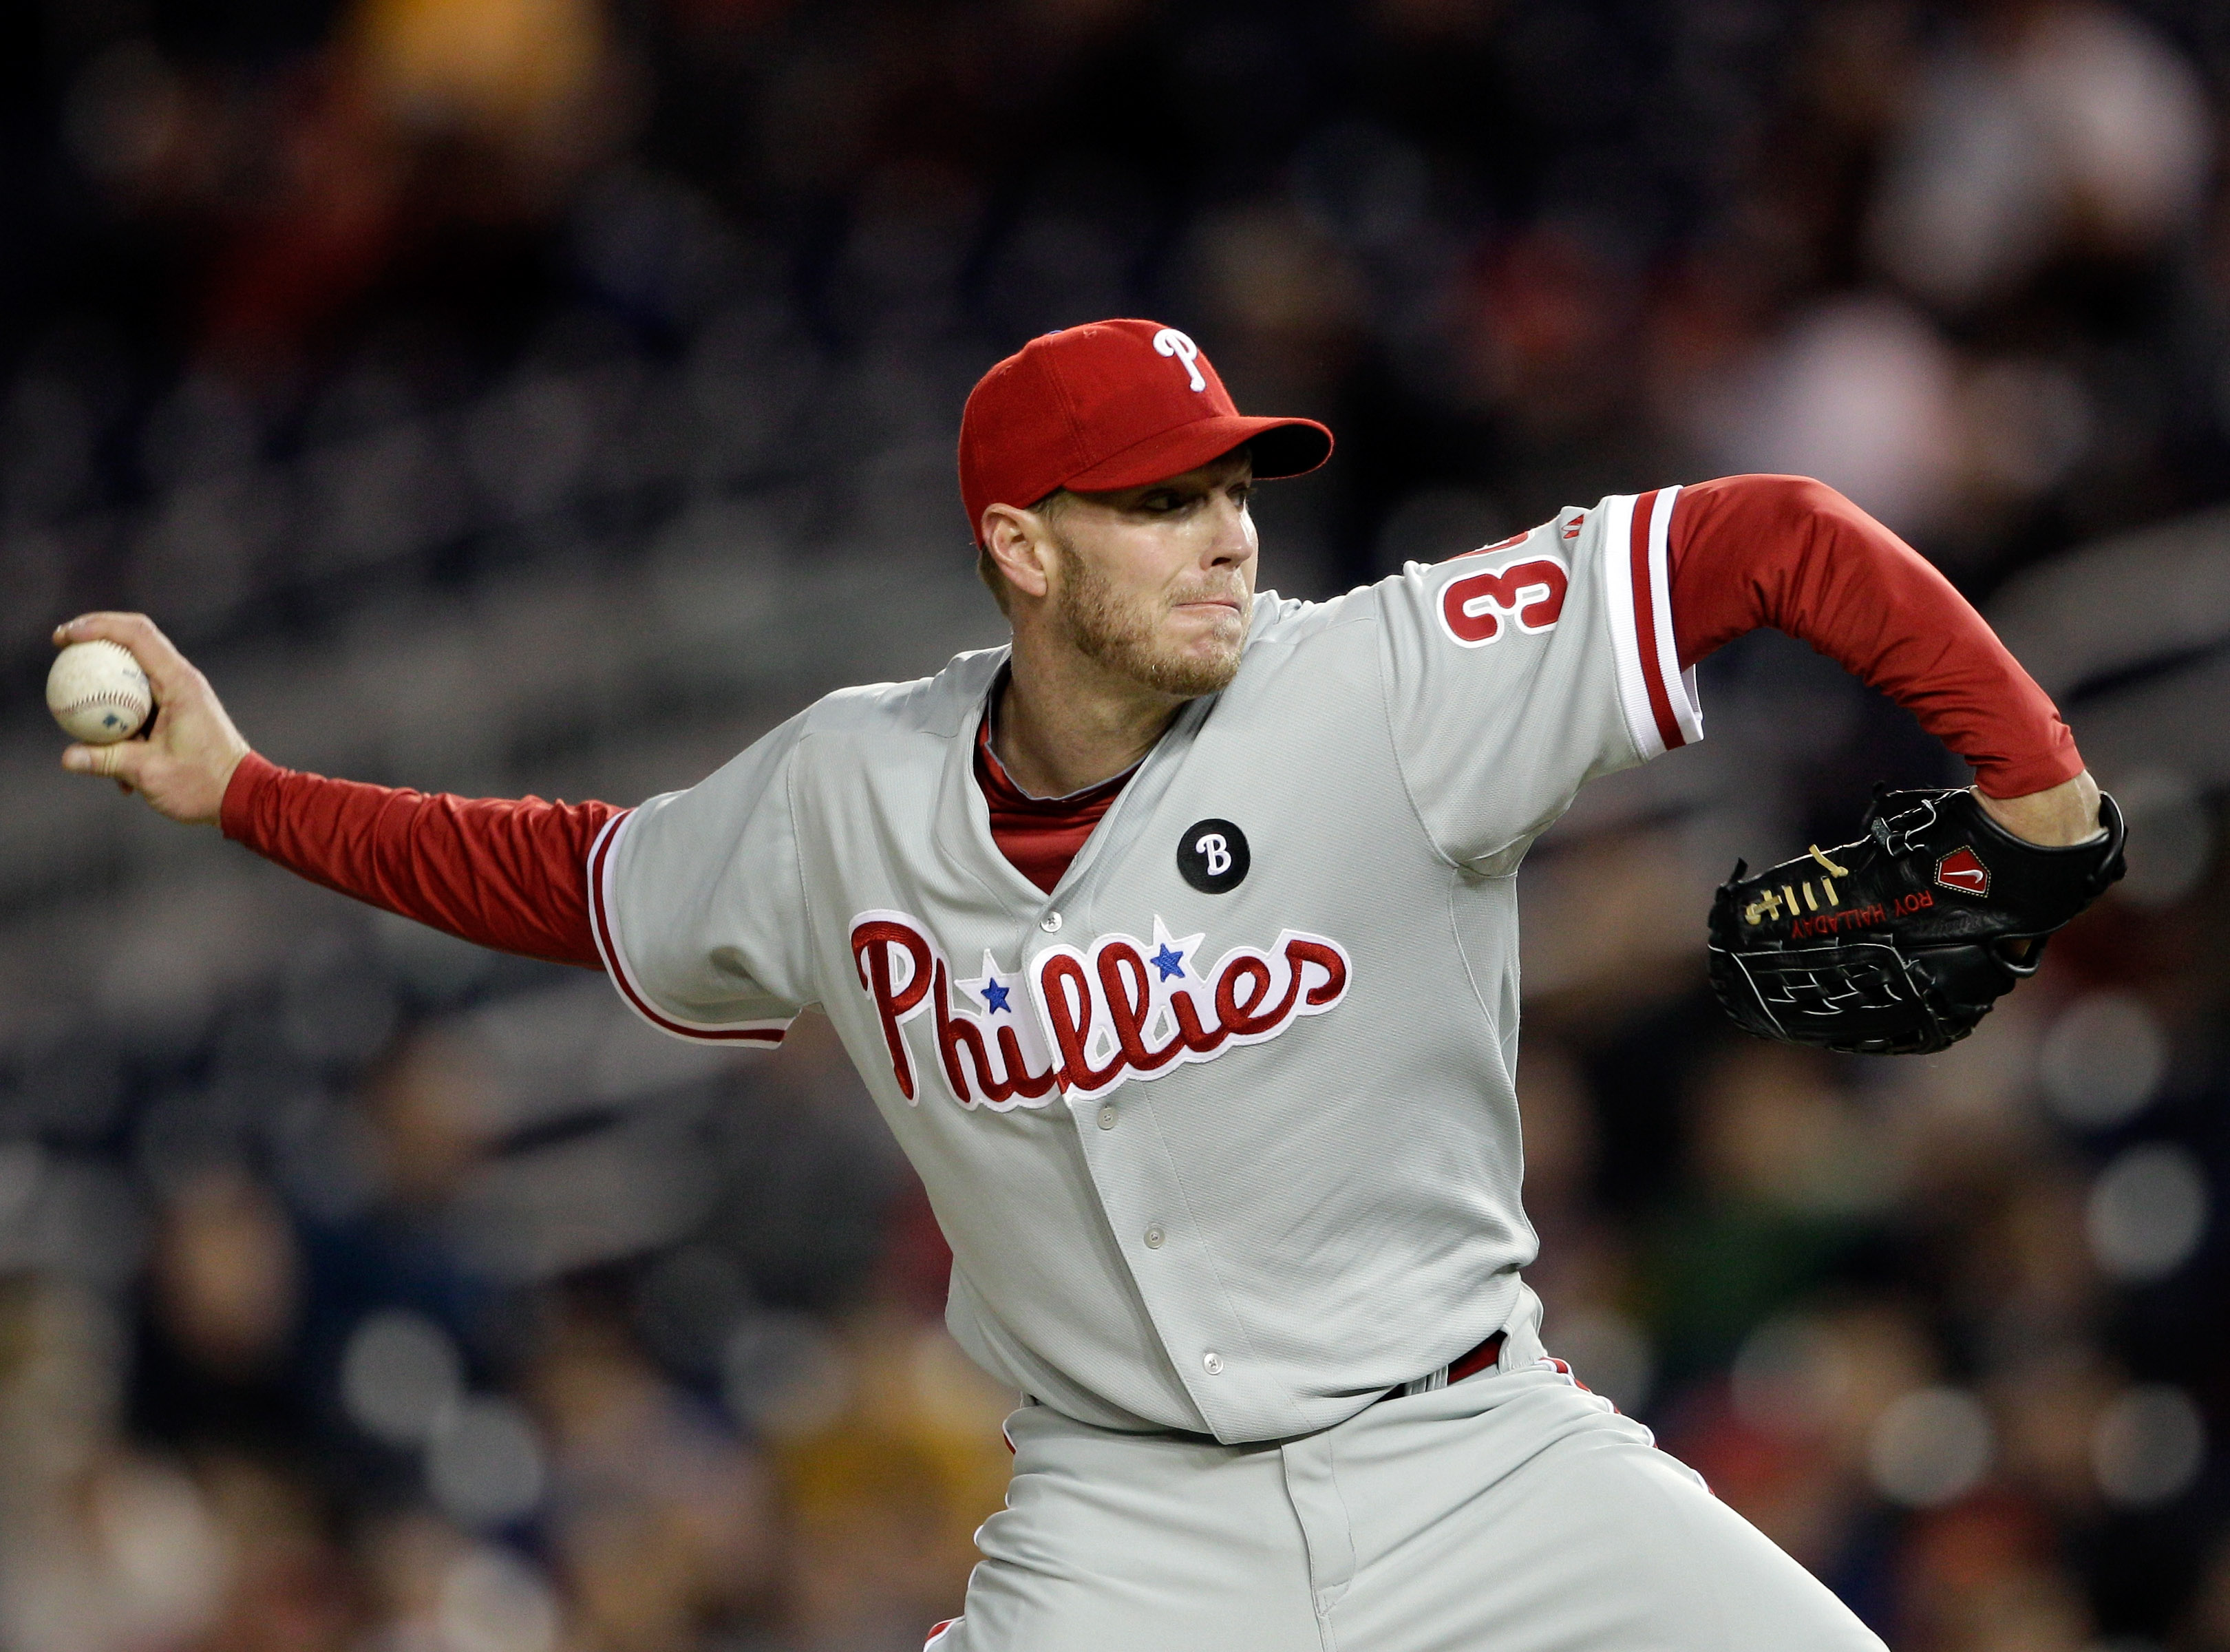 13 years ago, Phillies' Roy Halladay pitched 2nd no-hitter in MLB